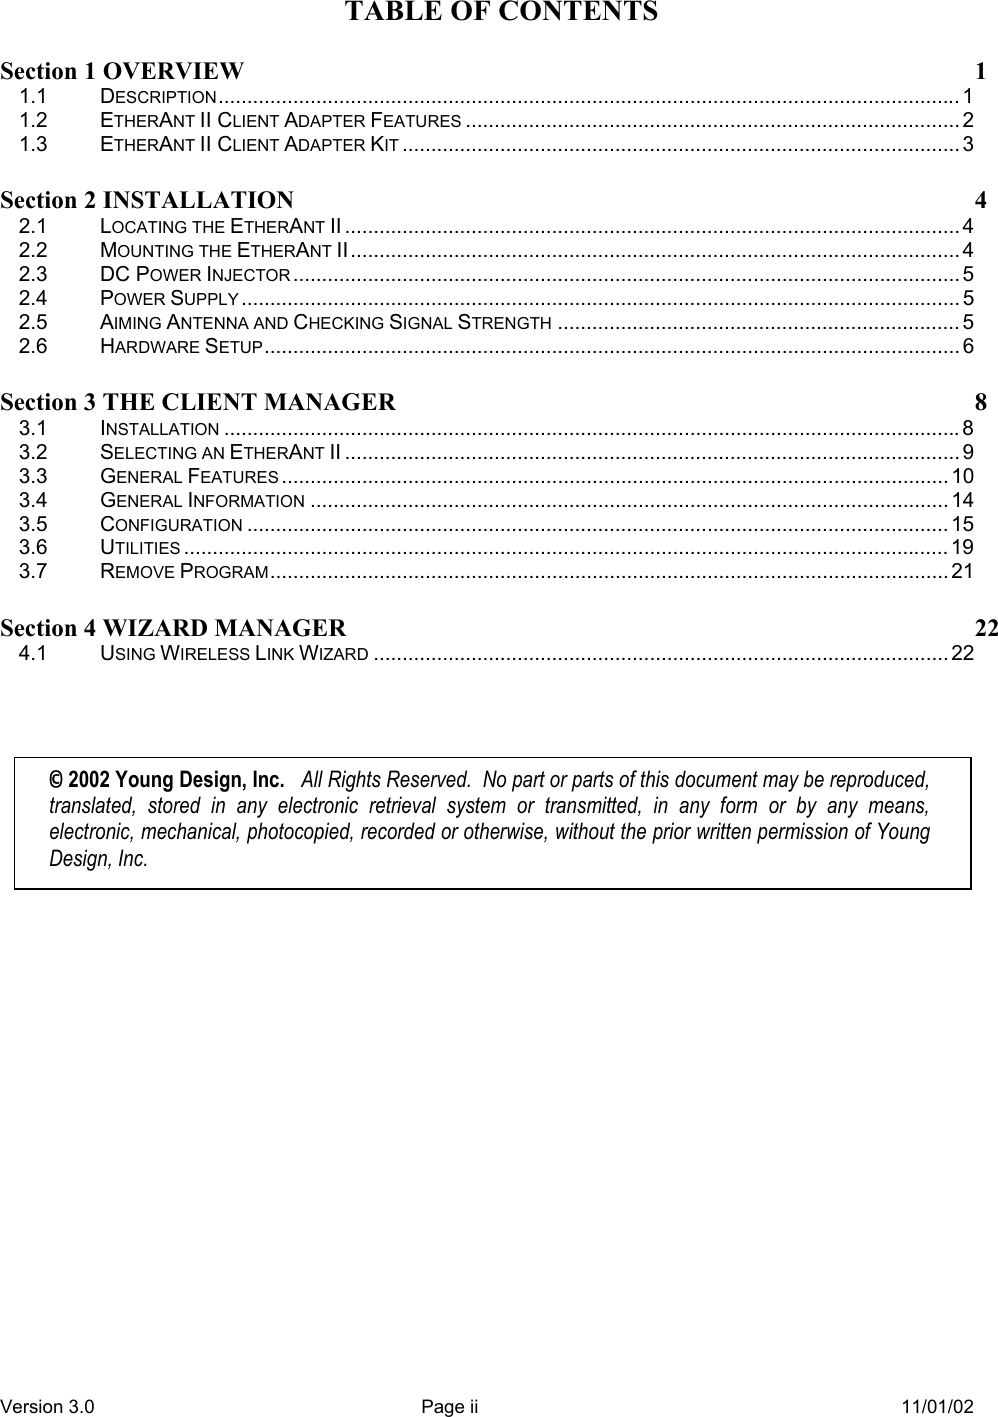 Version 3.0  Page ii  11/01/02 TABLE OF CONTENTS Section 1 OVERVIEW 1 1.1 DESCRIPTION................................................................................................................................. 1 1.2 ETHERANT II CLIENT ADAPTER FEATURES ...................................................................................... 2 1.3 ETHERANT II CLIENT ADAPTER KIT ................................................................................................. 3 Section 2 INSTALLATION 4 2.1 LOCATING THE ETHERANT II ........................................................................................................... 4 2.2 MOUNTING THE ETHERANT II.......................................................................................................... 4 2.3 DC POWER INJECTOR .................................................................................................................... 5 2.4 POWER SUPPLY ............................................................................................................................. 5 2.5 AIMING ANTENNA AND CHECKING SIGNAL STRENGTH ...................................................................... 5 2.6 HARDWARE SETUP......................................................................................................................... 6 Section 3 THE CLIENT MANAGER  8 3.1 INSTALLATION ................................................................................................................................8 3.2 SELECTING AN ETHERANT II ........................................................................................................... 9 3.3 GENERAL FEATURES .................................................................................................................... 10 3.4 GENERAL INFORMATION ............................................................................................................... 14 3.5 CONFIGURATION .......................................................................................................................... 15 3.6 UTILITIES ..................................................................................................................................... 19 3.7 REMOVE PROGRAM...................................................................................................................... 21 Section 4 WIZARD MANAGER  22 4.1 USING WIRELESS LINK WIZARD .................................................................................................... 22   © 2002 Young Design, Inc.   All Rights Reserved.  No part or parts of this document may be reproduced, translated, stored in any electronic retrieval system or transmitted, in any form or by any means, electronic, mechanical, photocopied, recorded or otherwise, without the prior written permission of Young Design, Inc. 